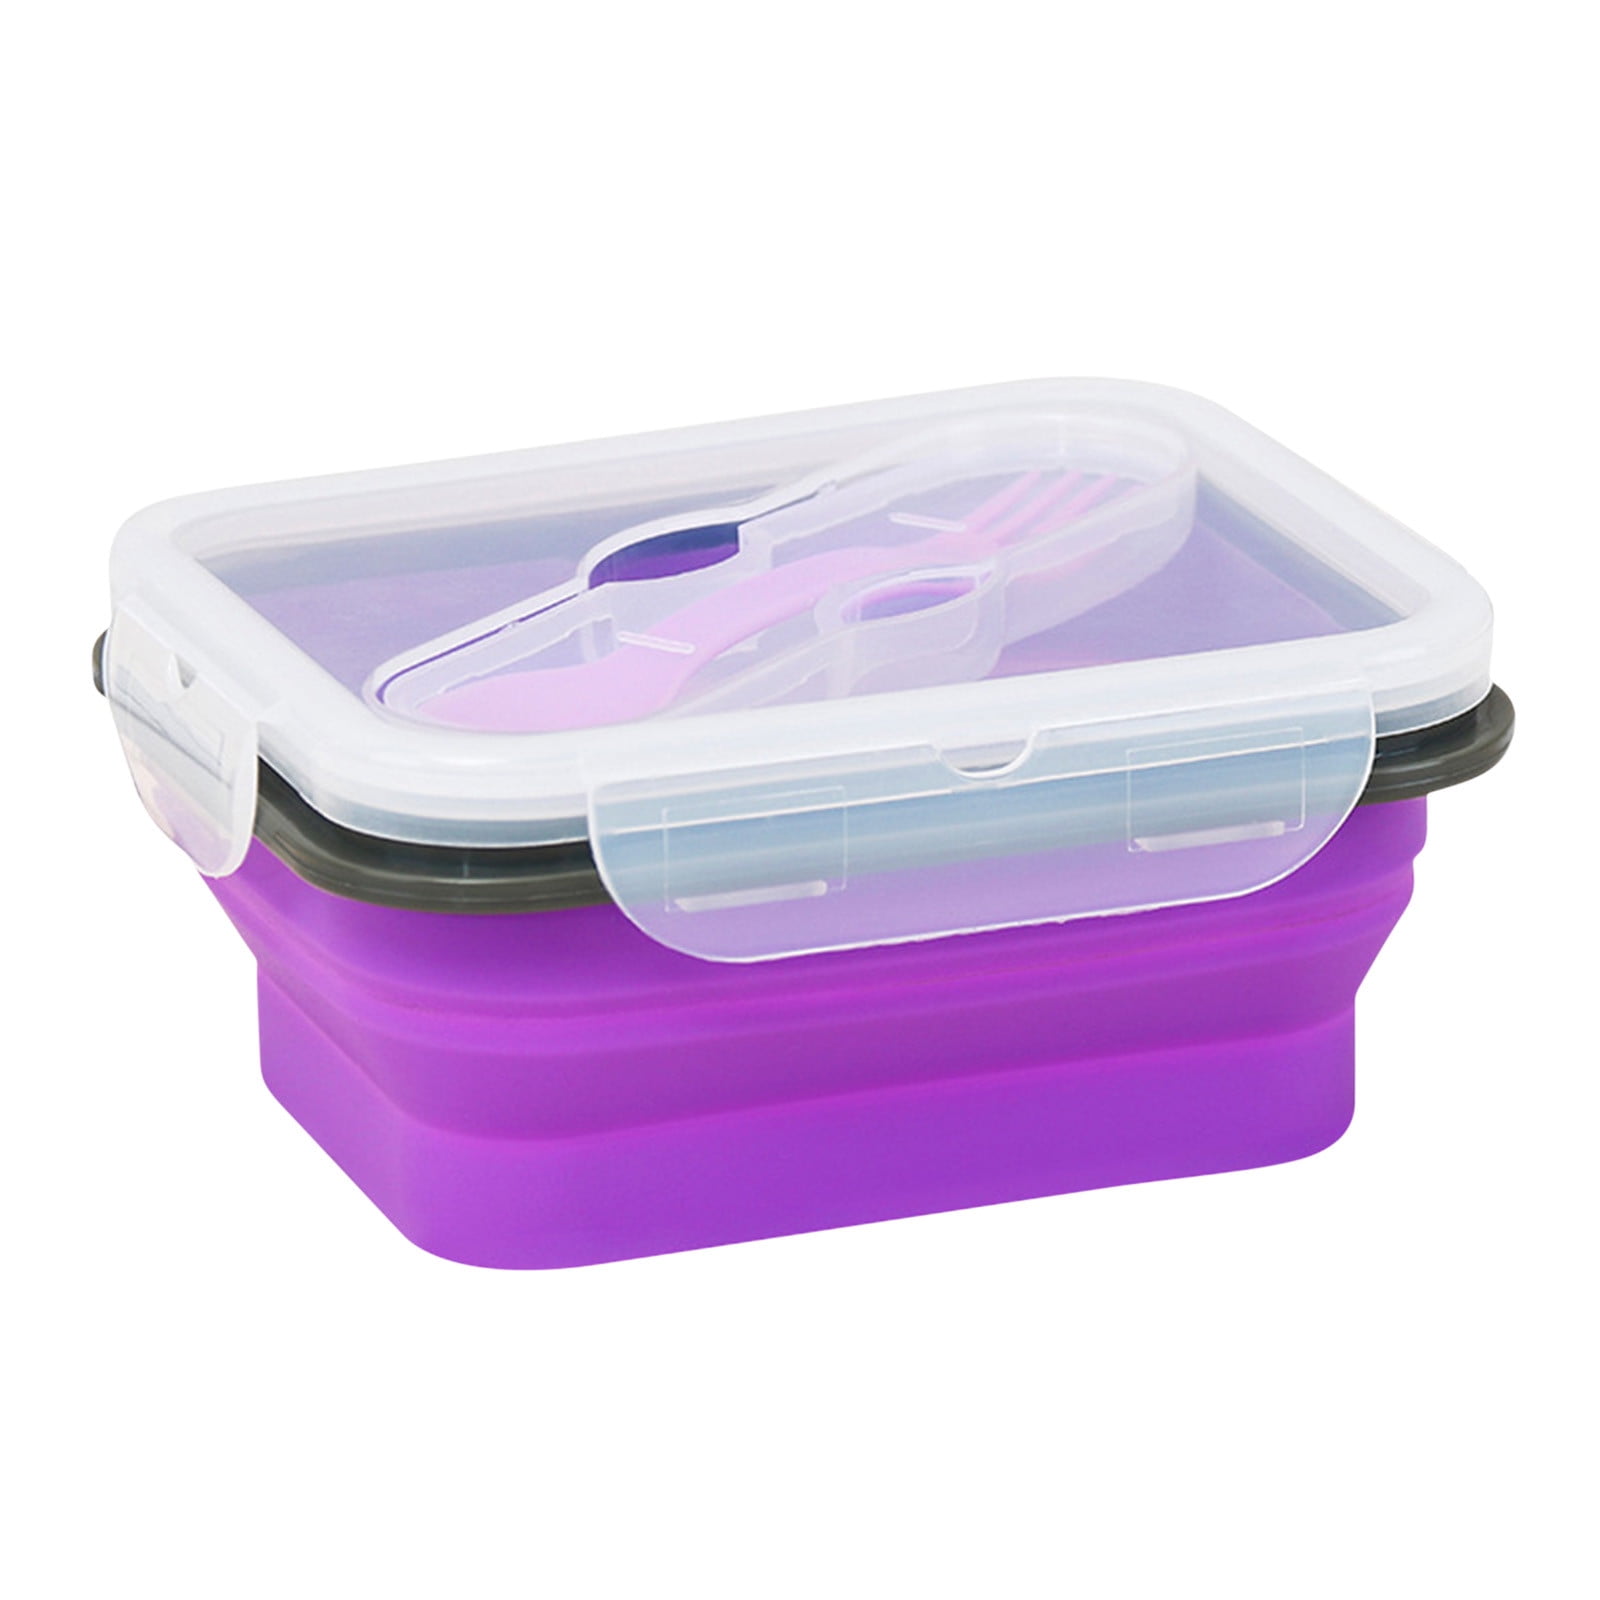 XMMSWDLA Silicone Collapsible Food Storage Containers with Silicone  Leakproof Lids, Clear Platinum Food-Grade, ,Compact, Reusable Lunch Box,  Microwave Safe Meal Prep（Purple） 